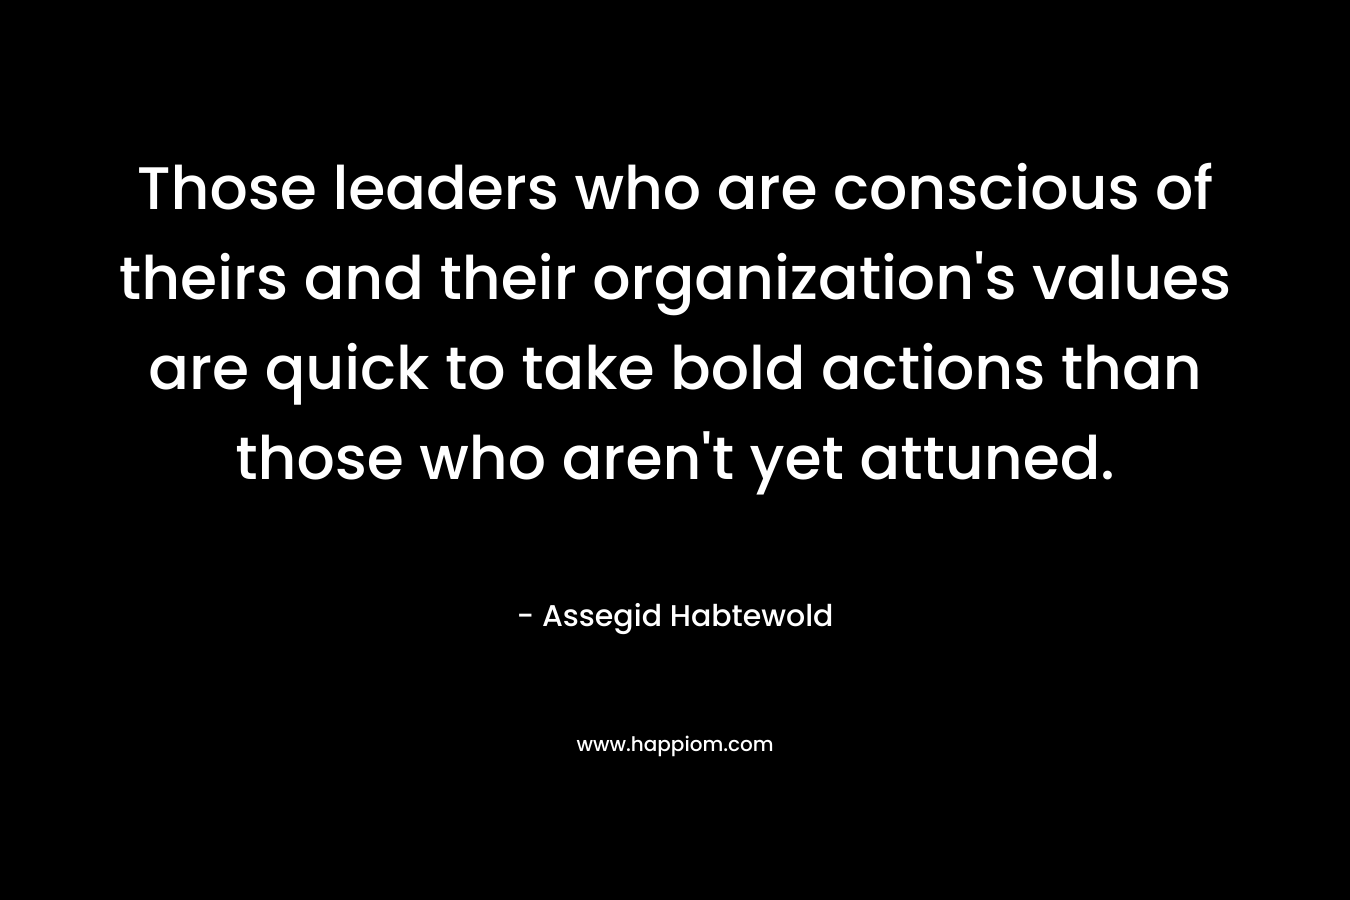 Those leaders who are conscious of theirs and their organization’s values are quick to take bold actions than those who aren’t yet attuned. – Assegid Habtewold